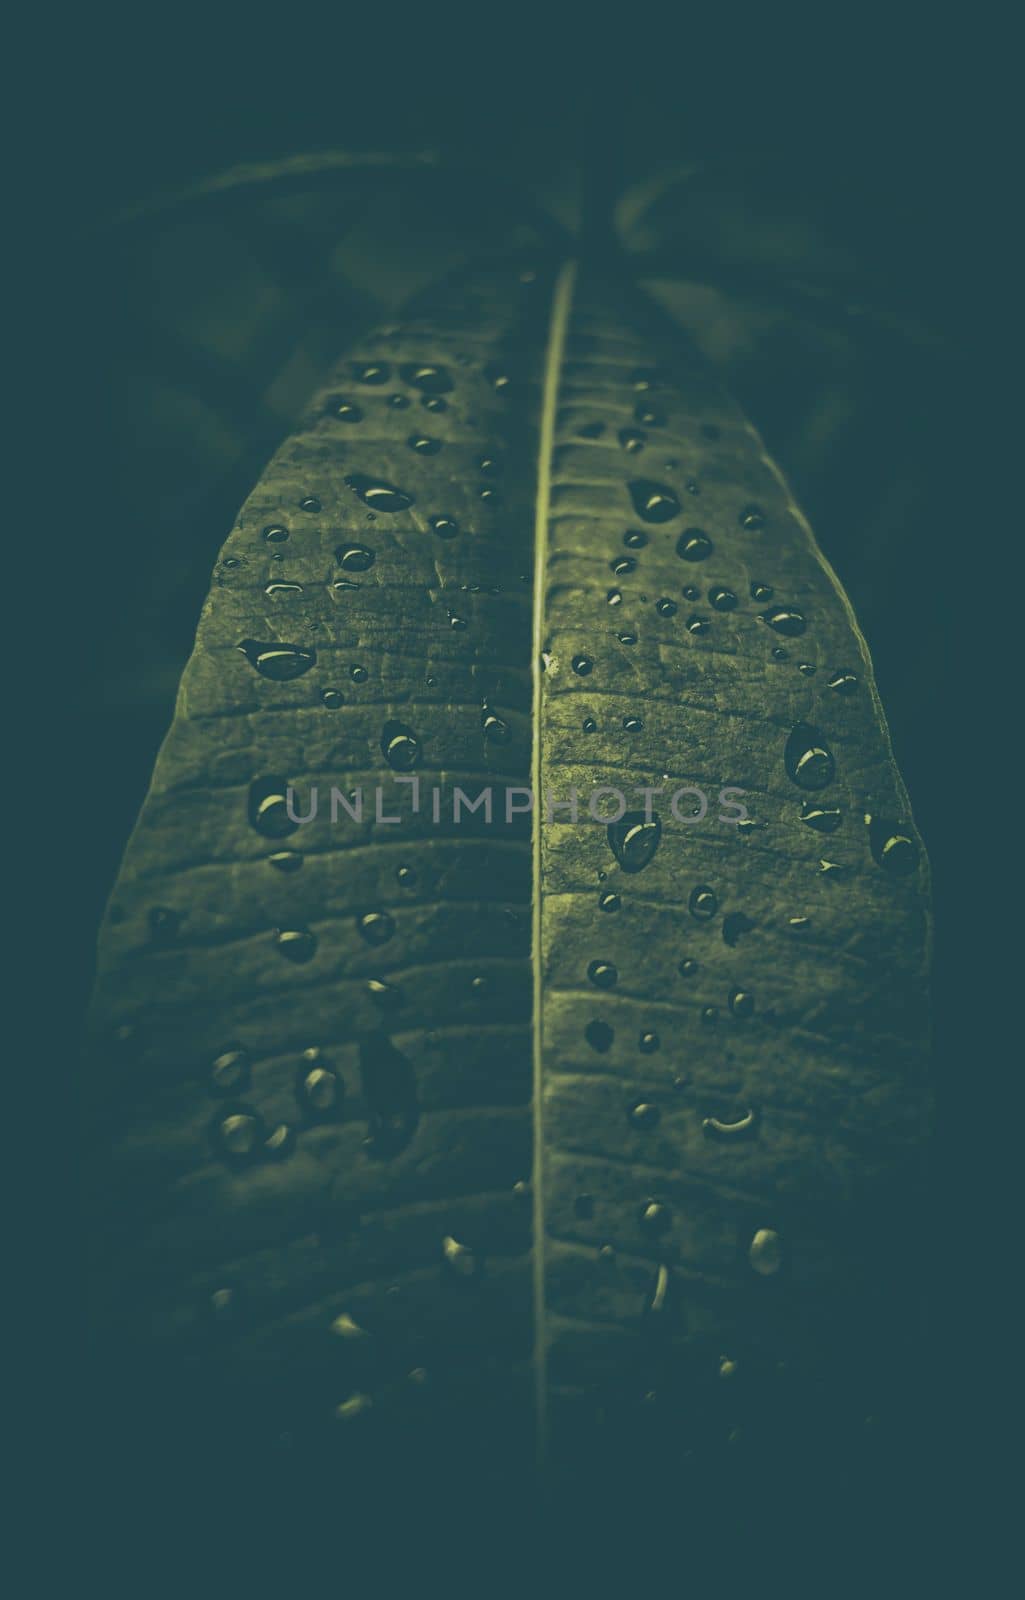 Close-up Raindrop on leaf Background in Dark Contrast with Vintage Style. by mesamong